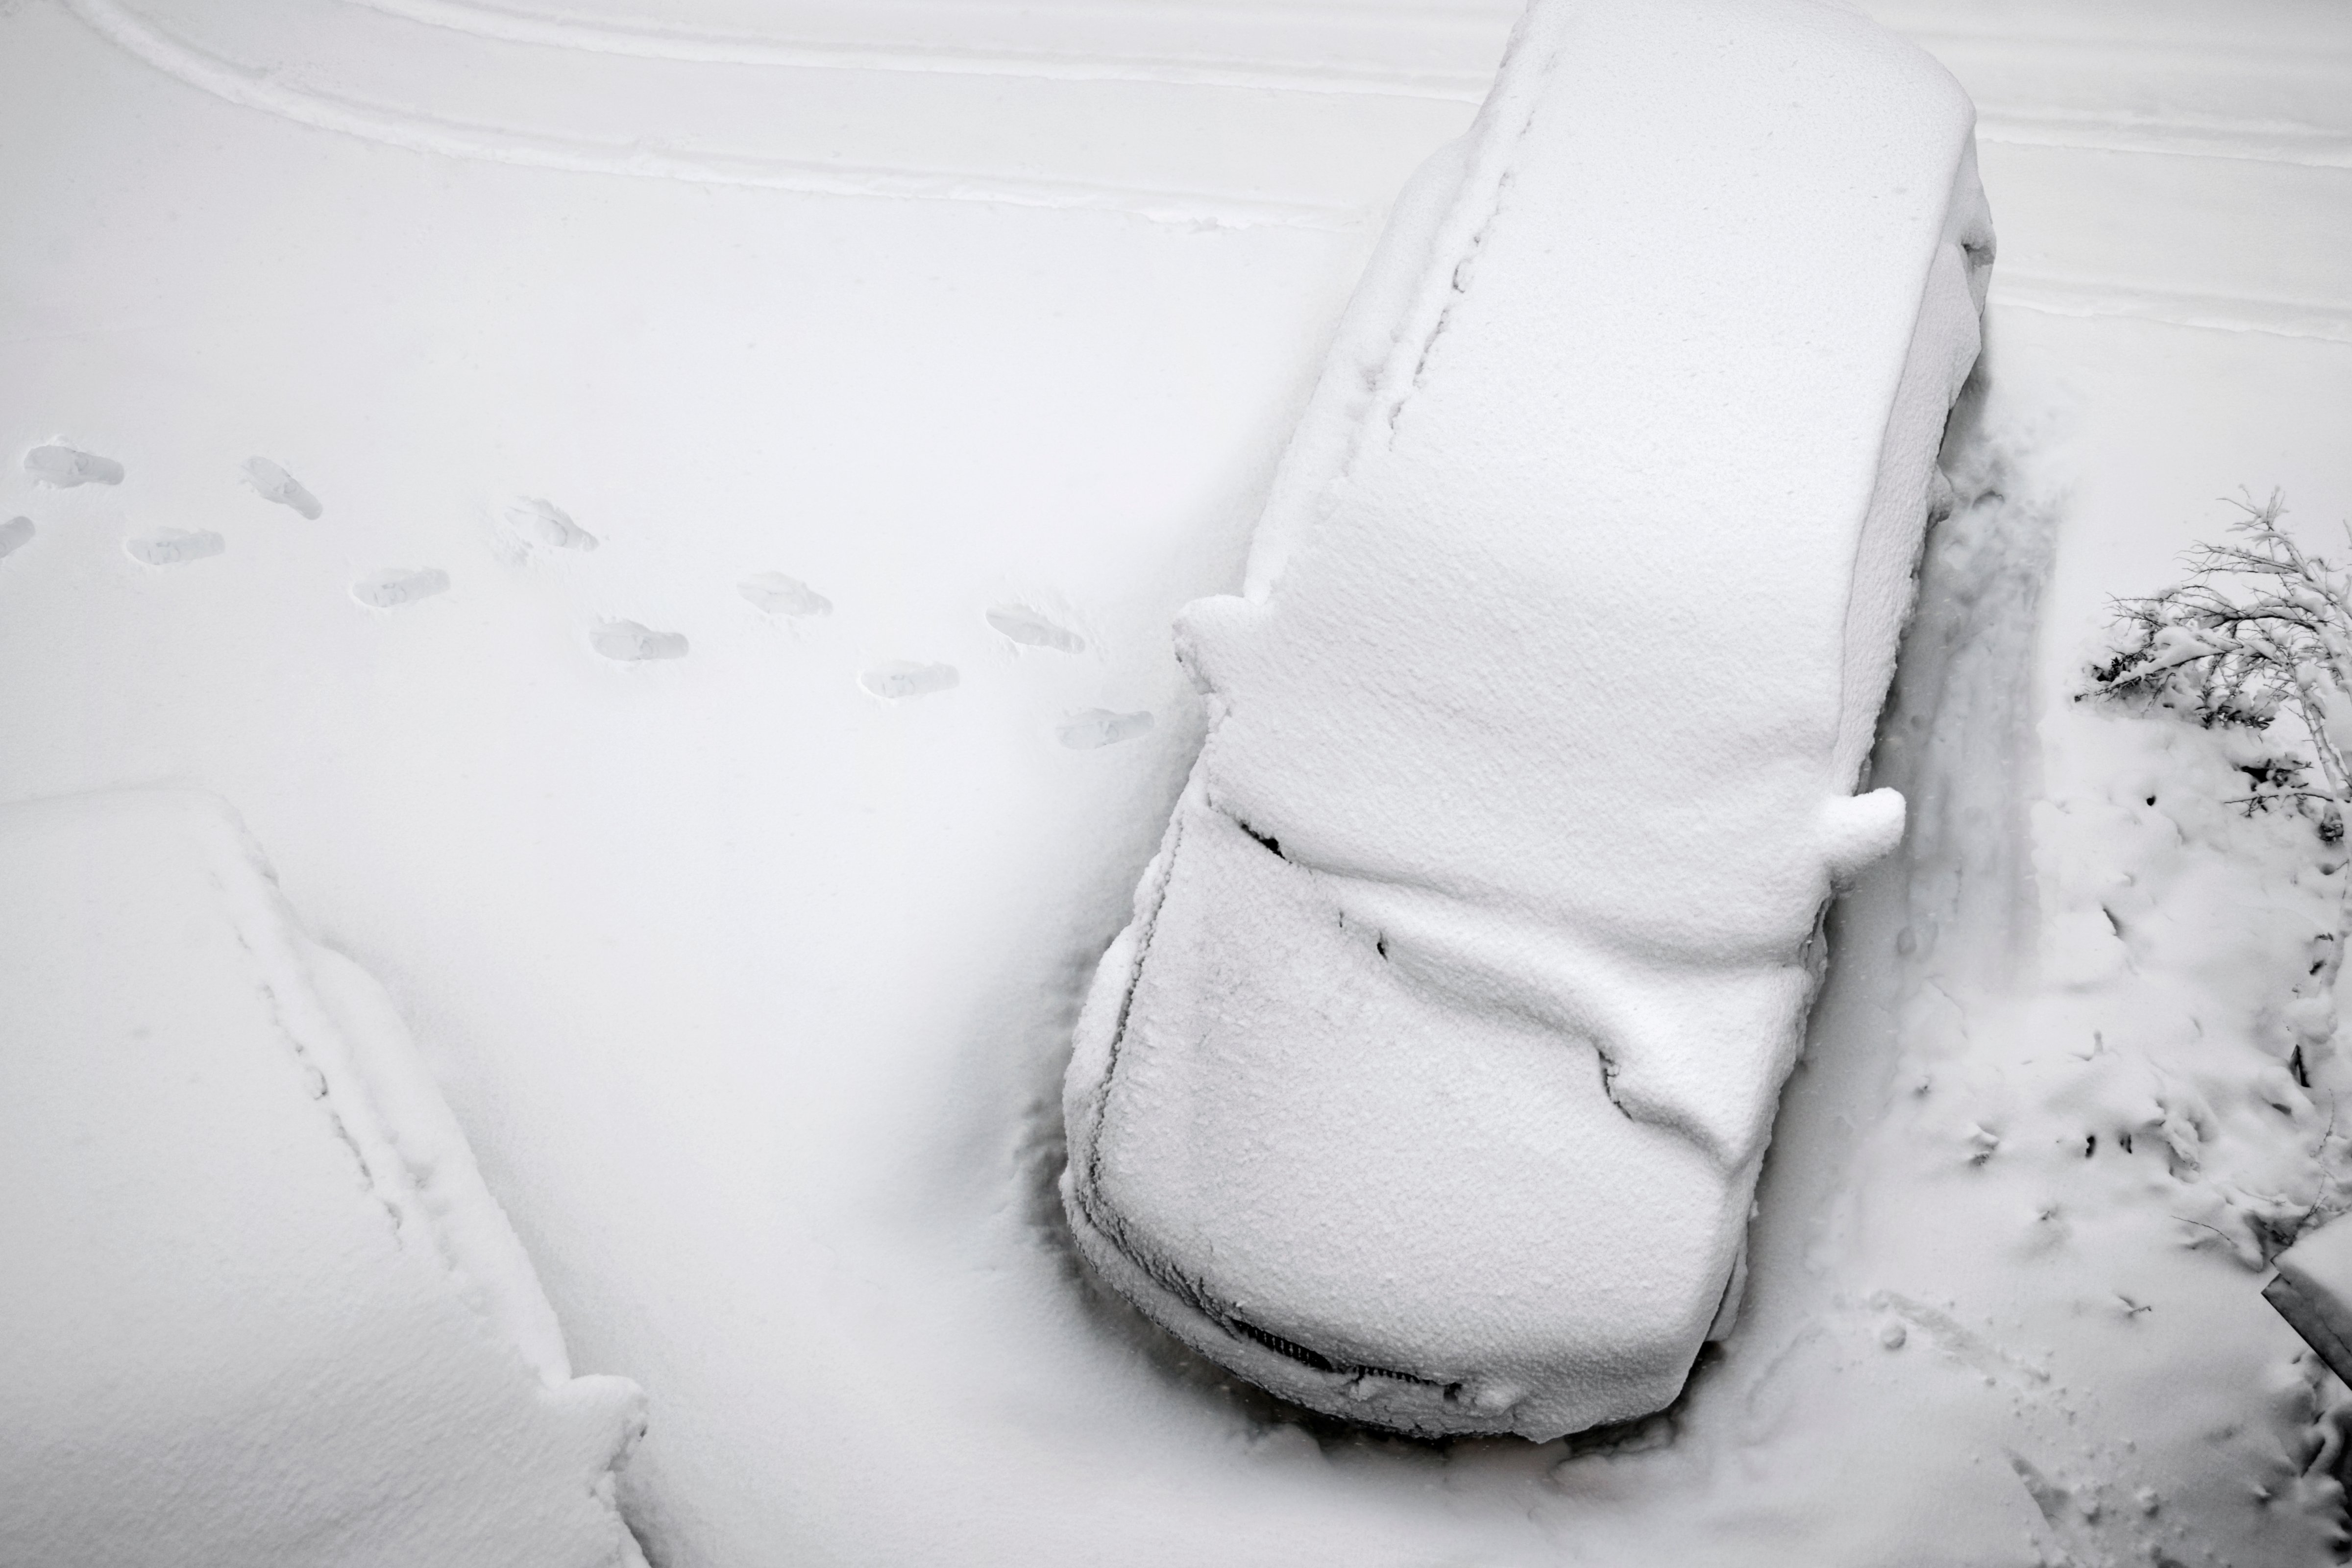 A car abandoned in the snow with foot prints leading away from the abandoned vehicle. (Hype Photography—Getty Images)